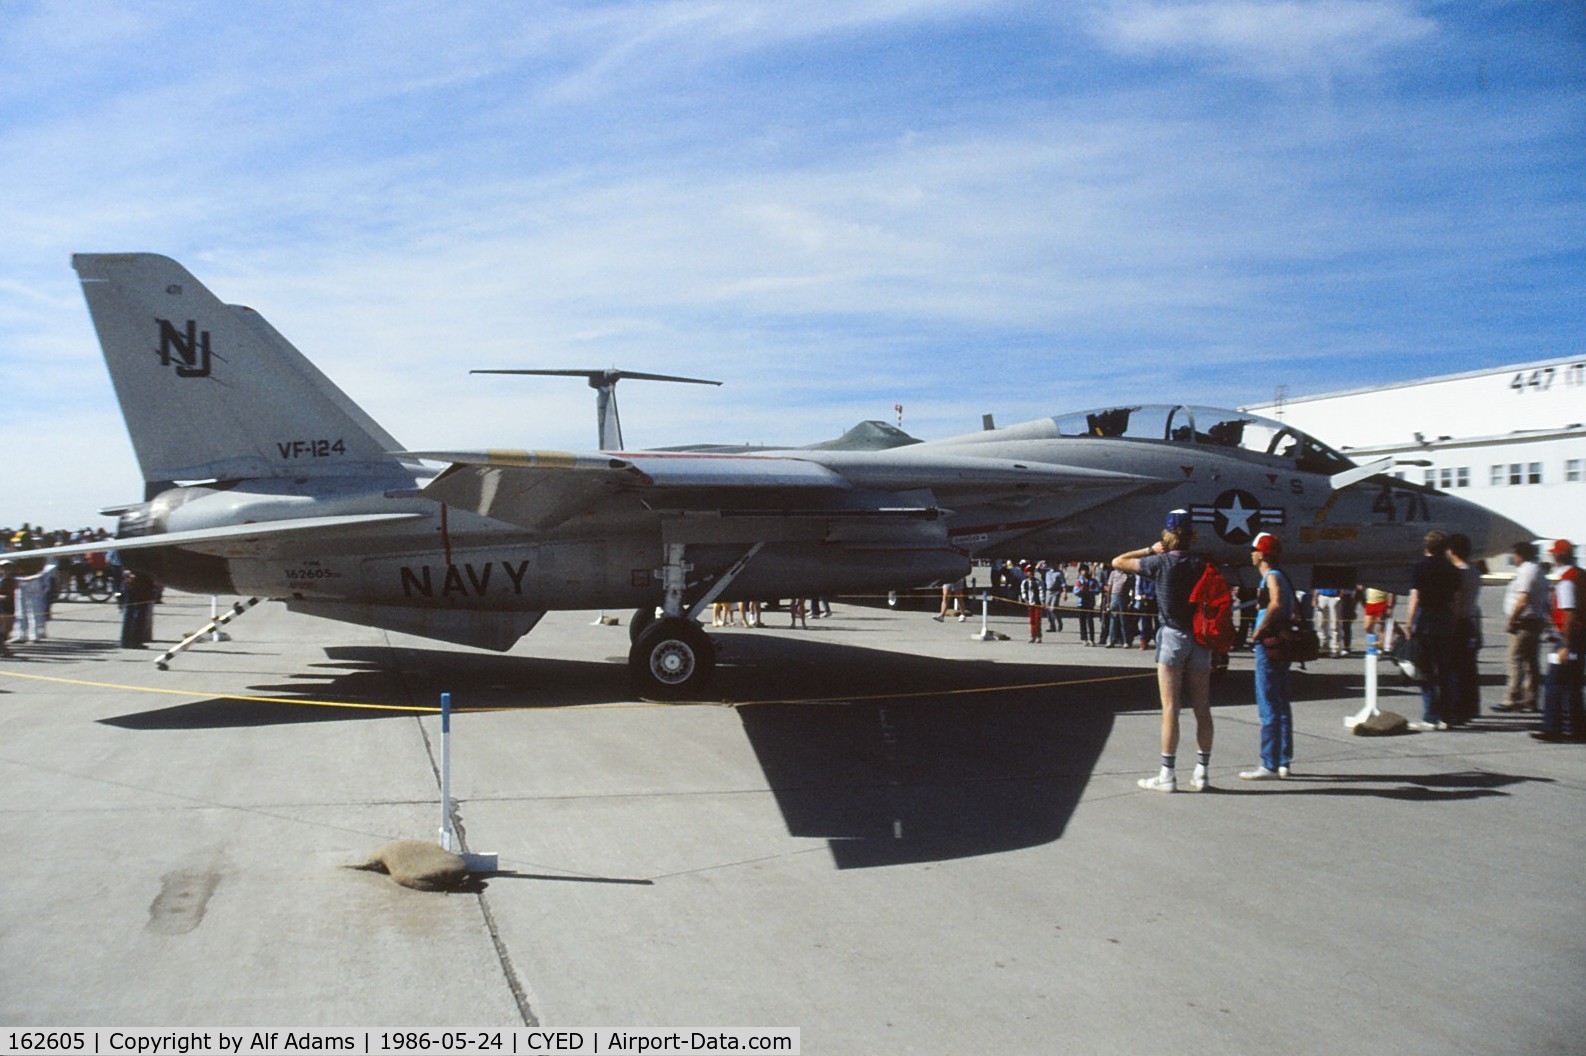 162605, 1986 Grumman F-14A Tomcat C/N 527, Photo shows F-14A 162605 on display at the annual airshow at Canadian Forces Base Edmonton (Namao), Alberta, Canada in 1986.